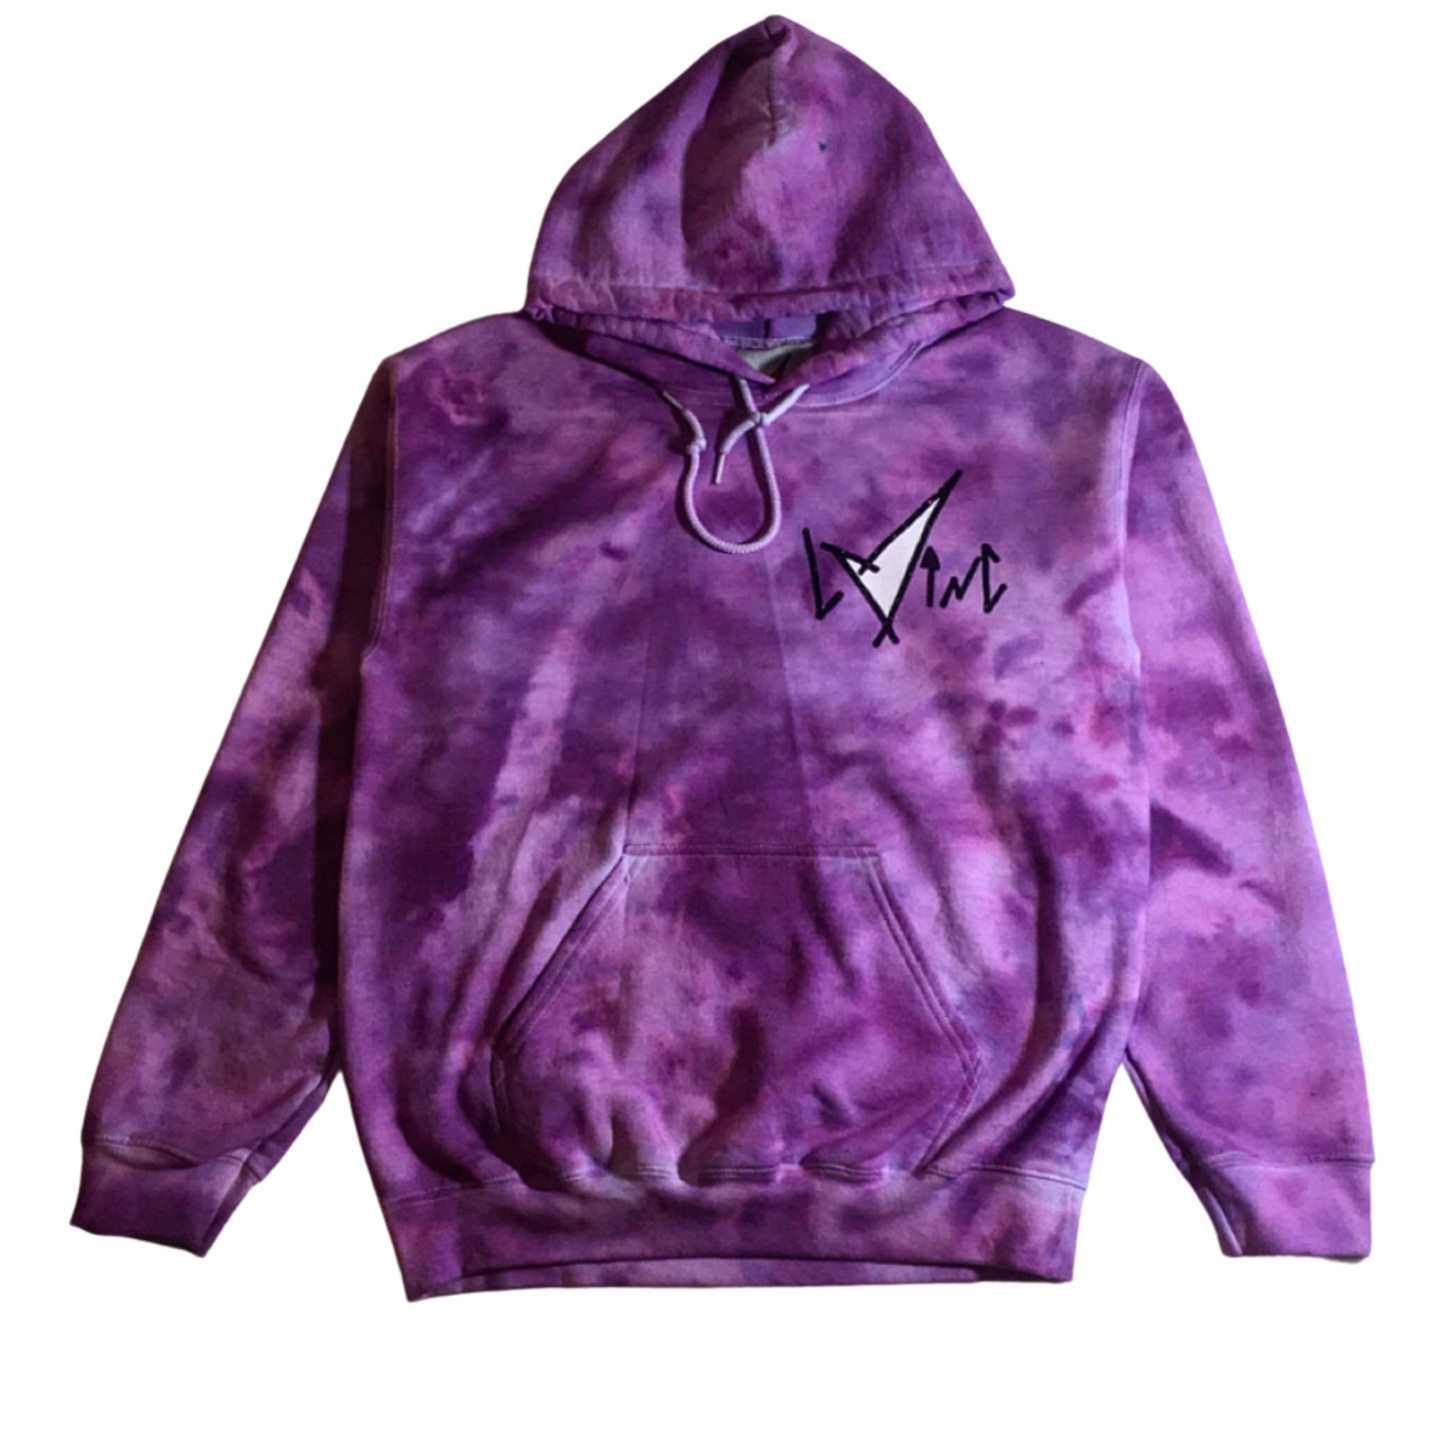 Purity Classic Ink Hoodie